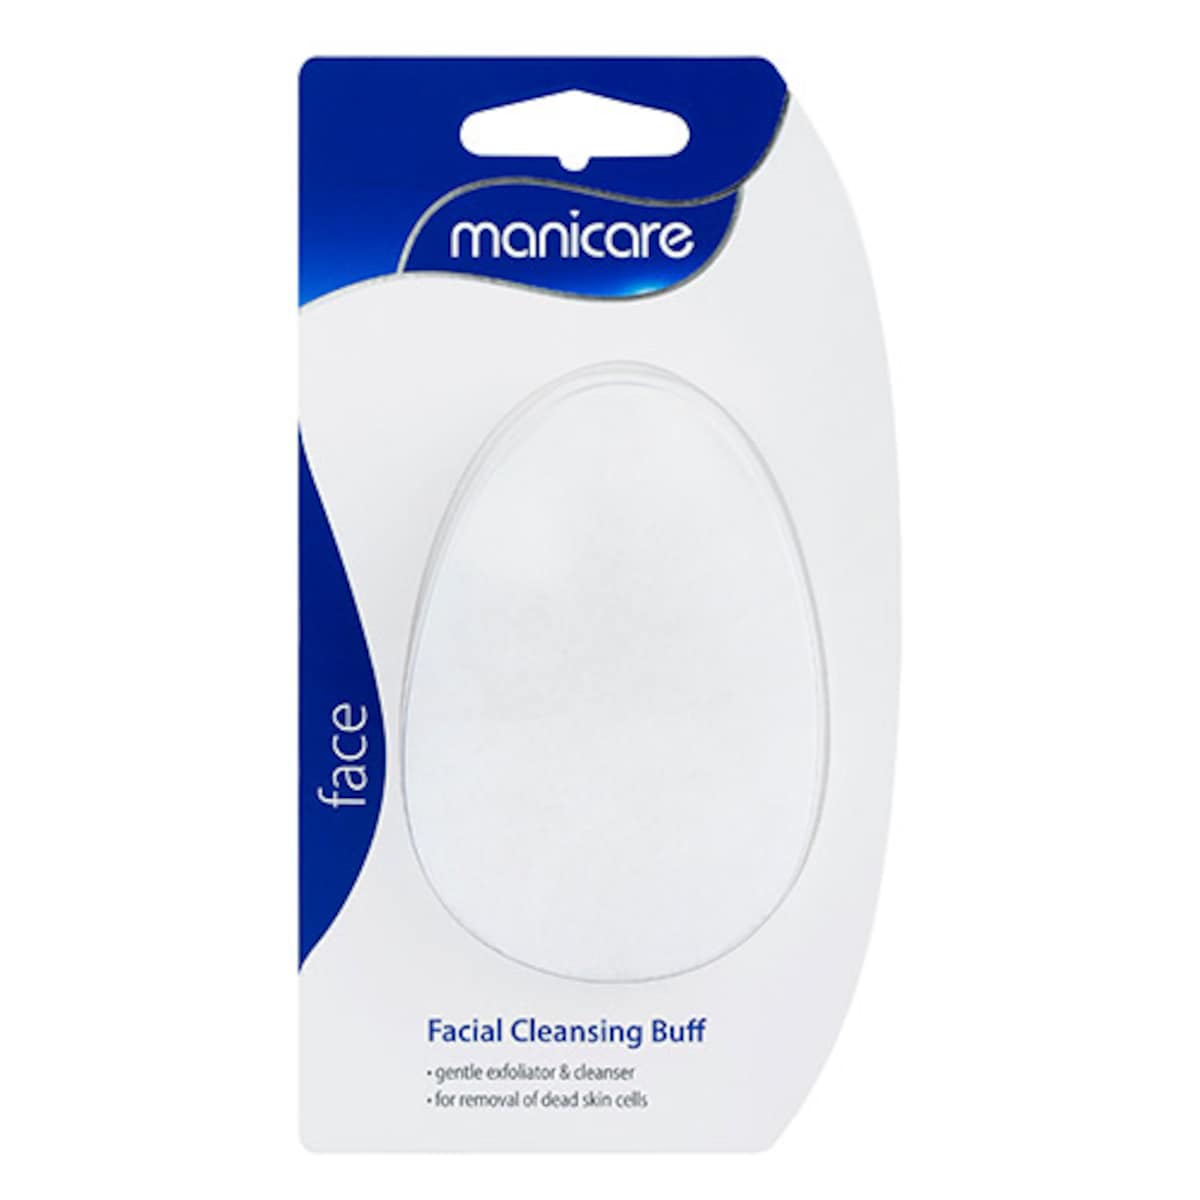 Manicare Facial Cleansing Buff